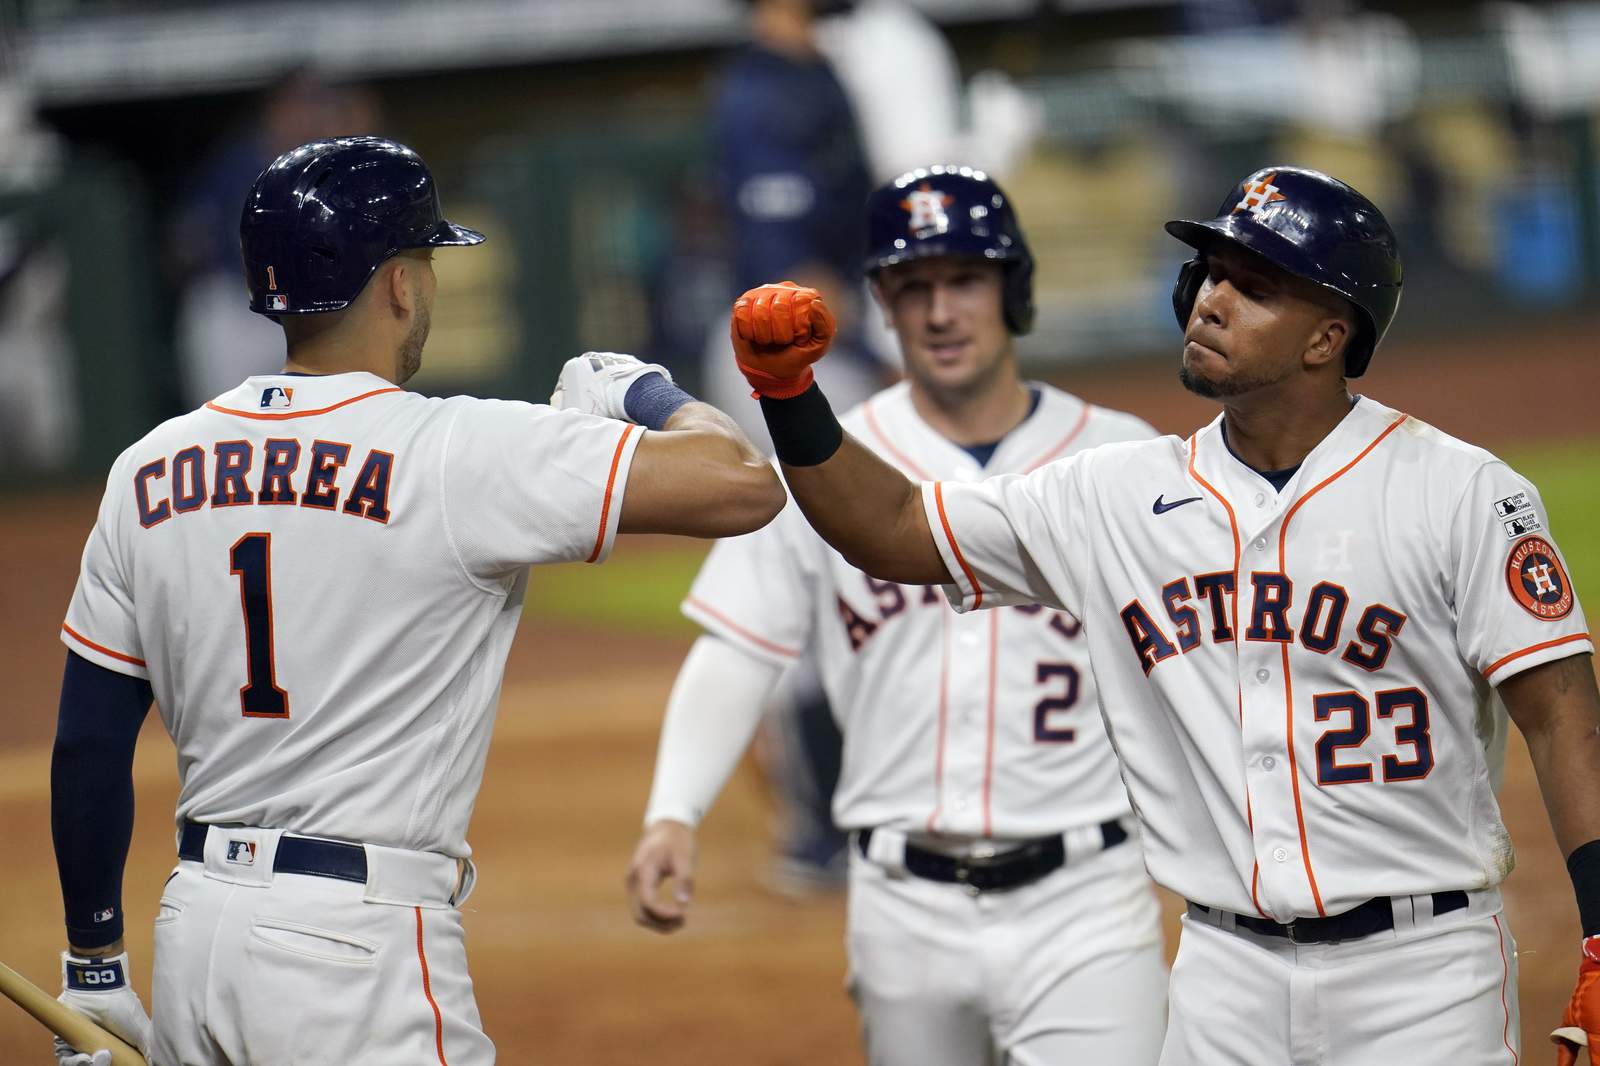 How to watch and listen to the Houston Astros and Seattle Mariners game on Saturday afternoon